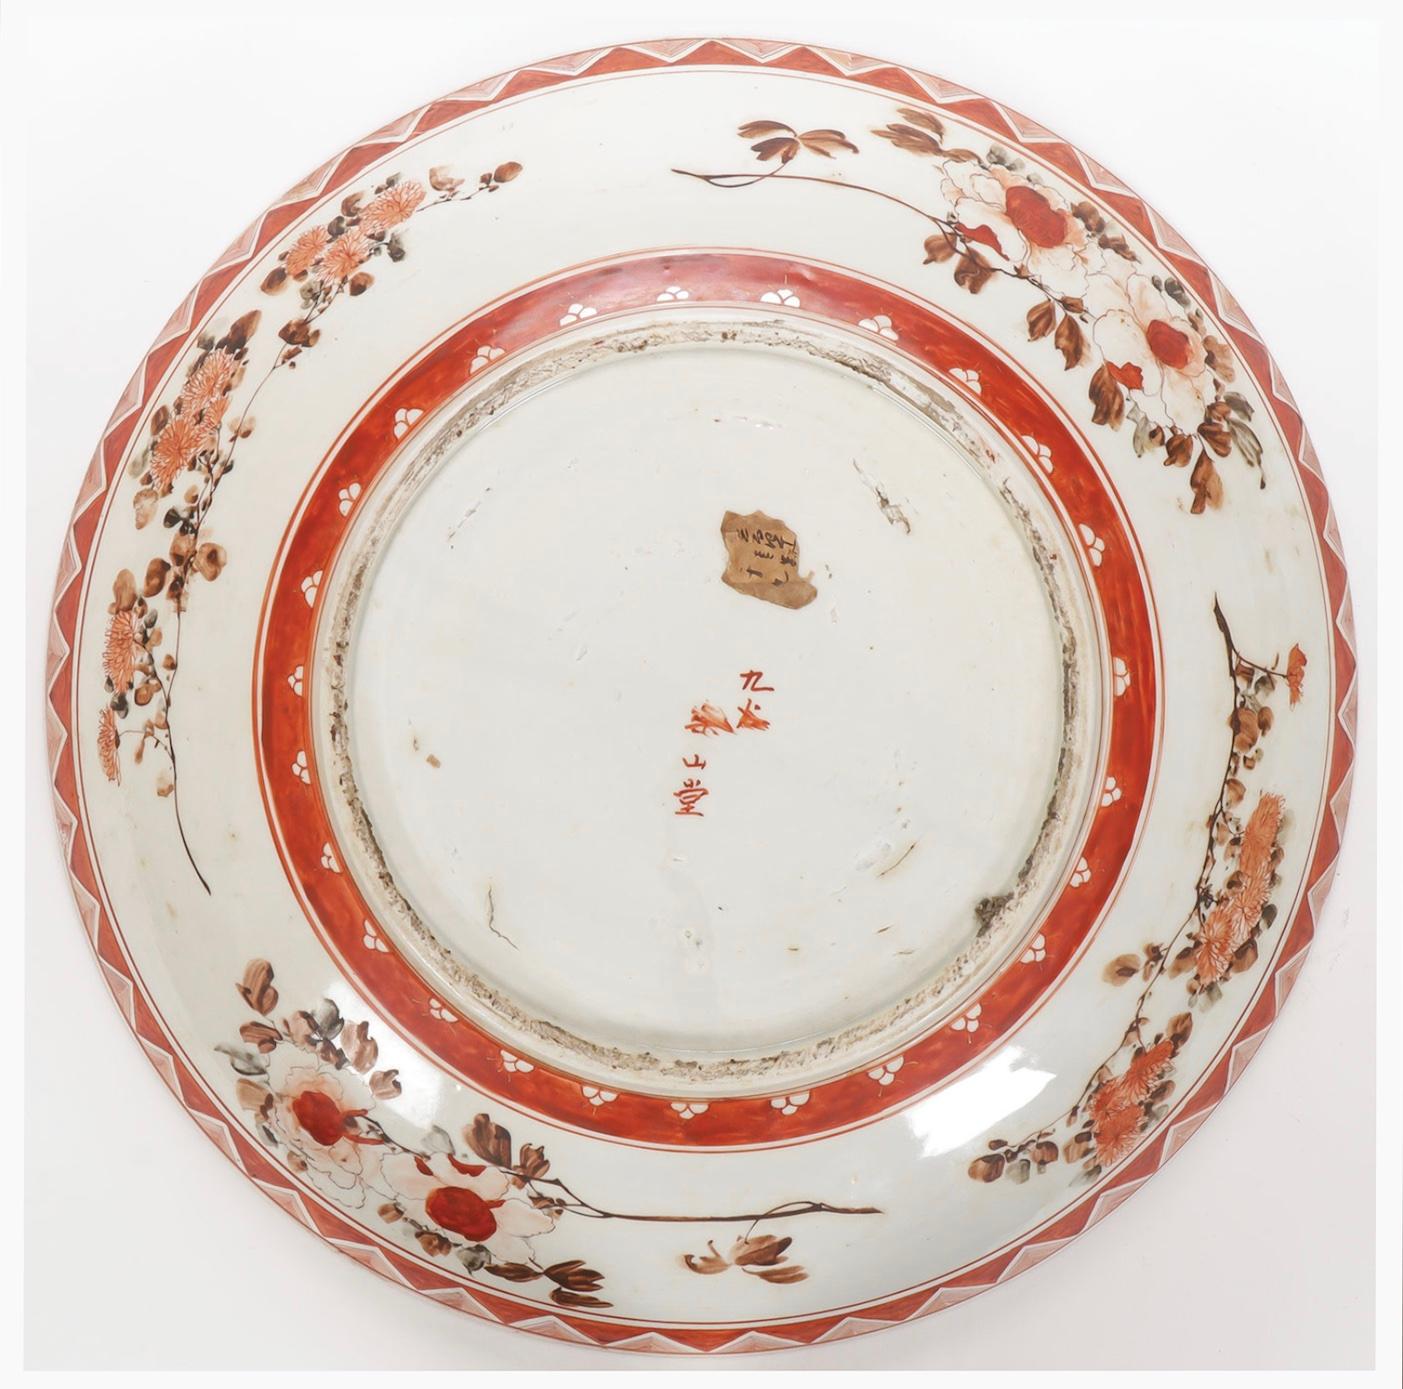 A large Japanese Meiji porcelain charger with figural details and flowers. 

Measures: diameters: 14.5 in.